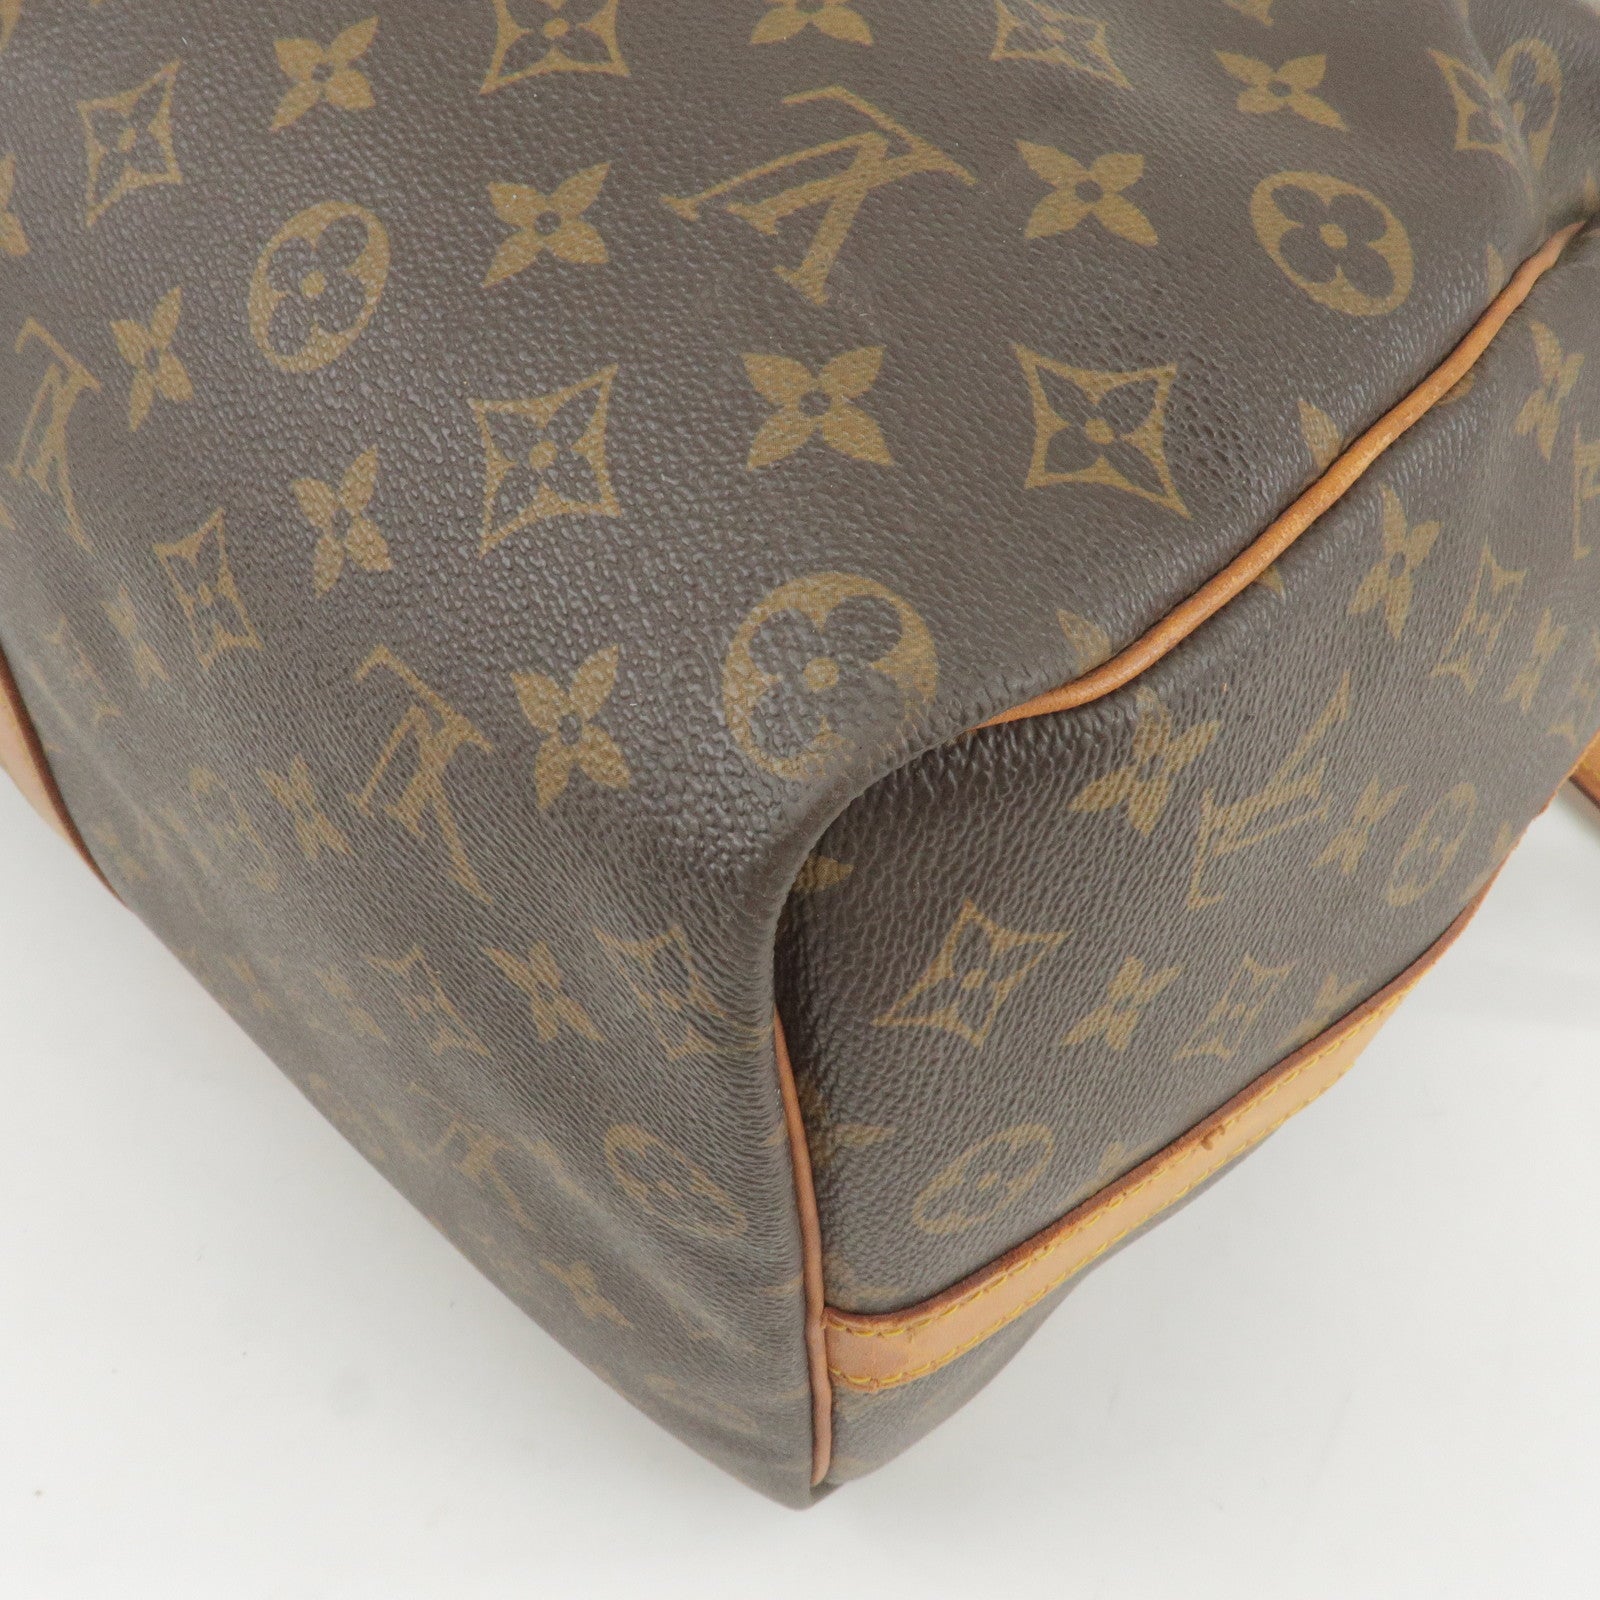 Louis Vuitton 2021 pre-owned Limited Edition Keepall 50